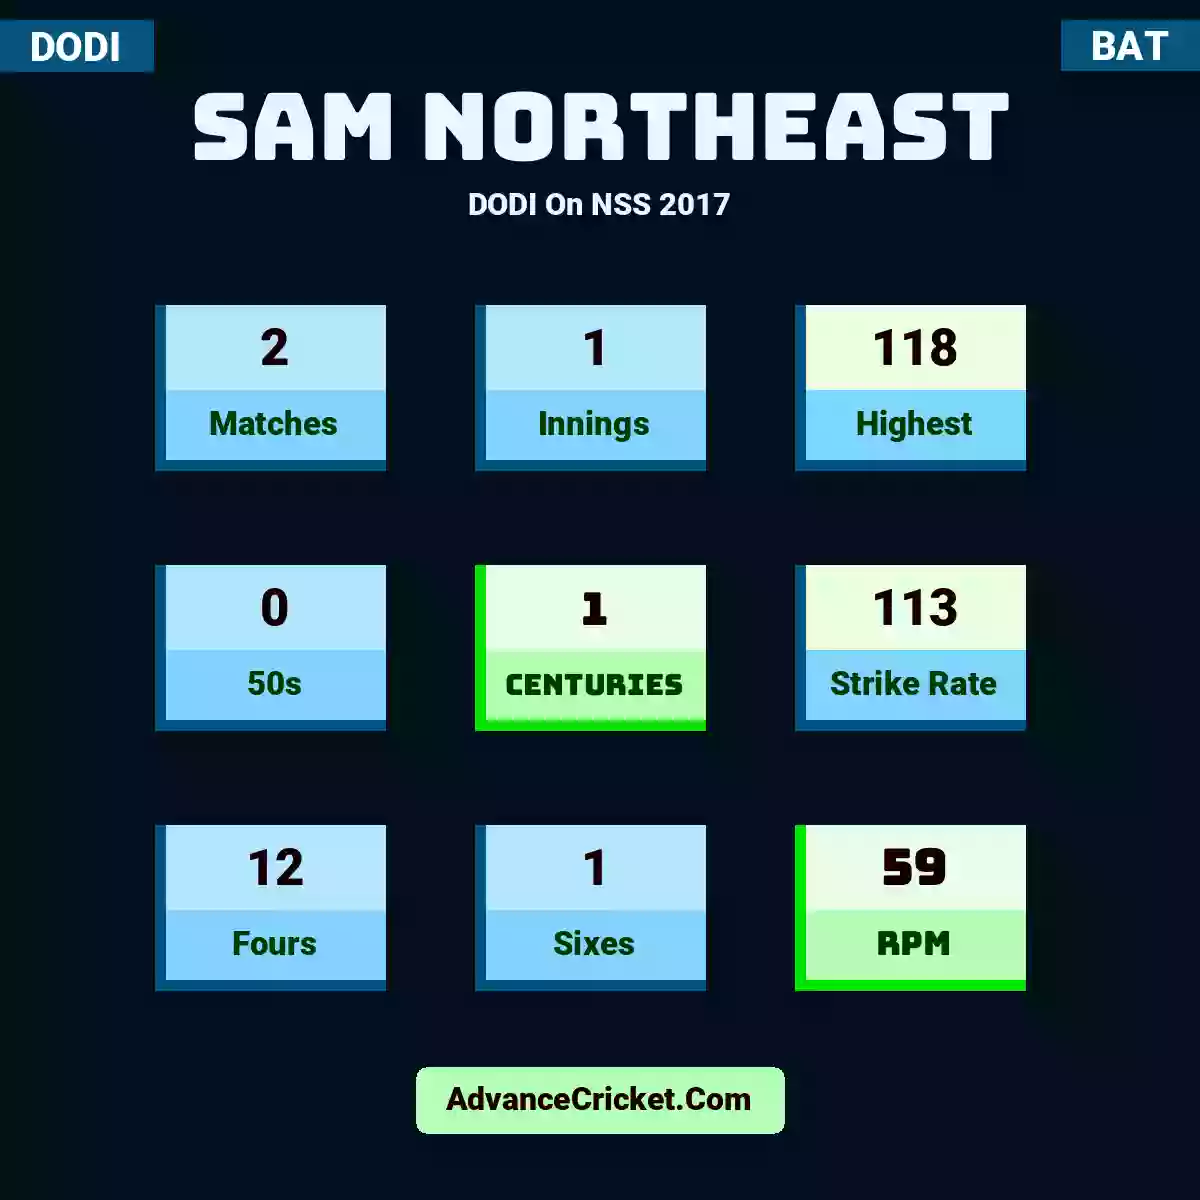 Sam Northeast DODI  On NSS 2017, Sam Northeast played 2 matches, scored 118 runs as highest, 0 half-centuries, and 1 centuries, with a strike rate of 113. S.Northeast hit 12 fours and 1 sixes, with an RPM of 59.